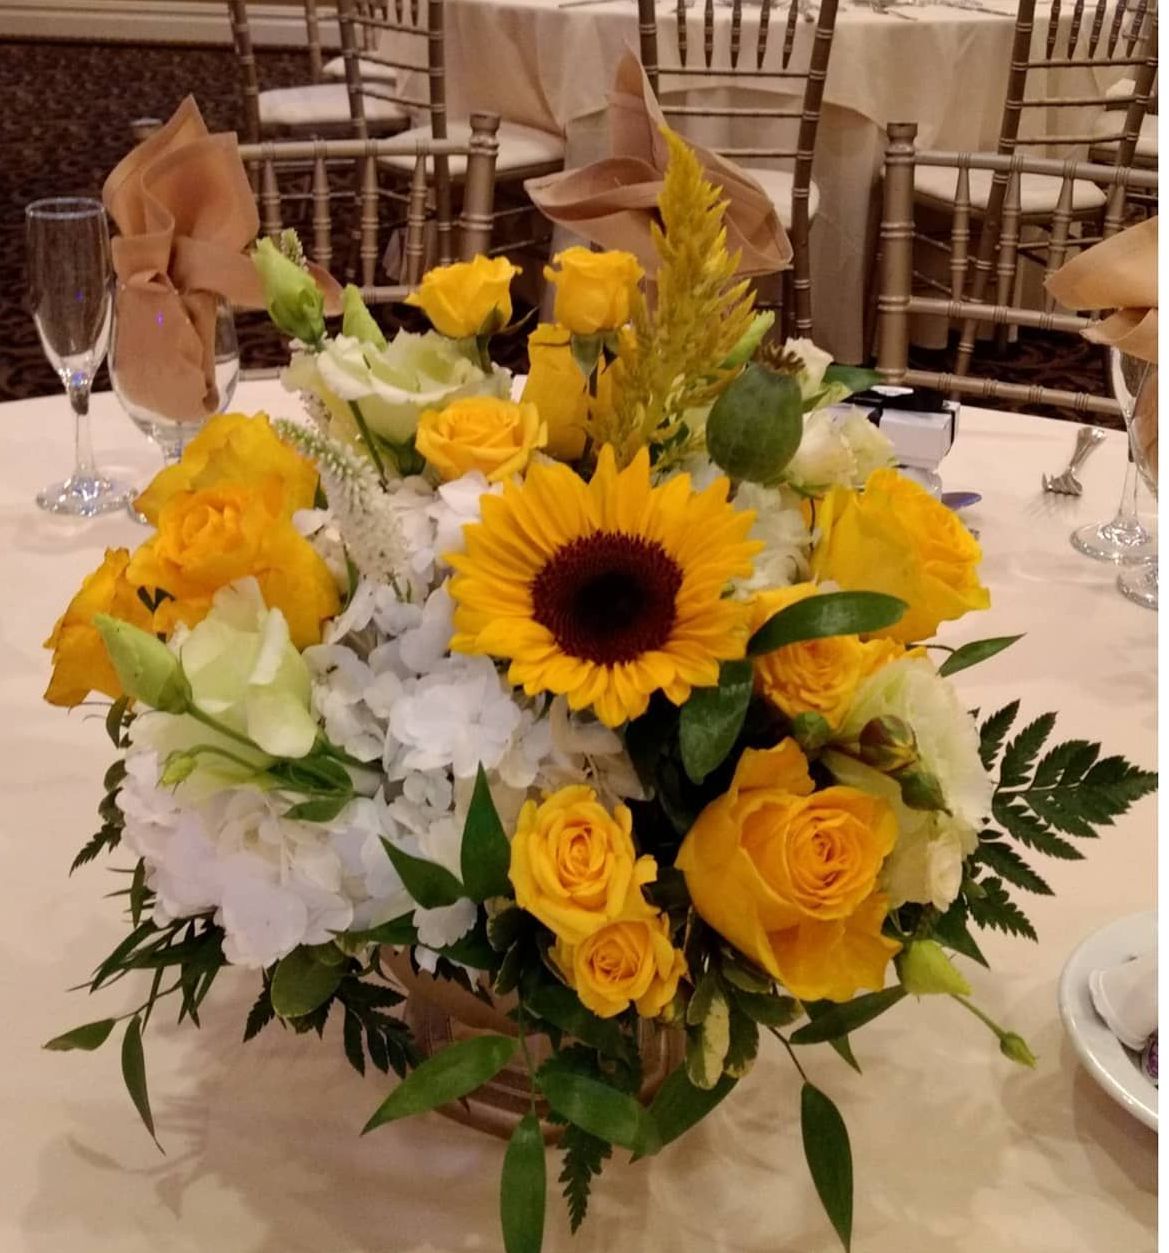 Tulips Floral Design located in Westbrook, CT creates beautiful floral designs for your baby shower.